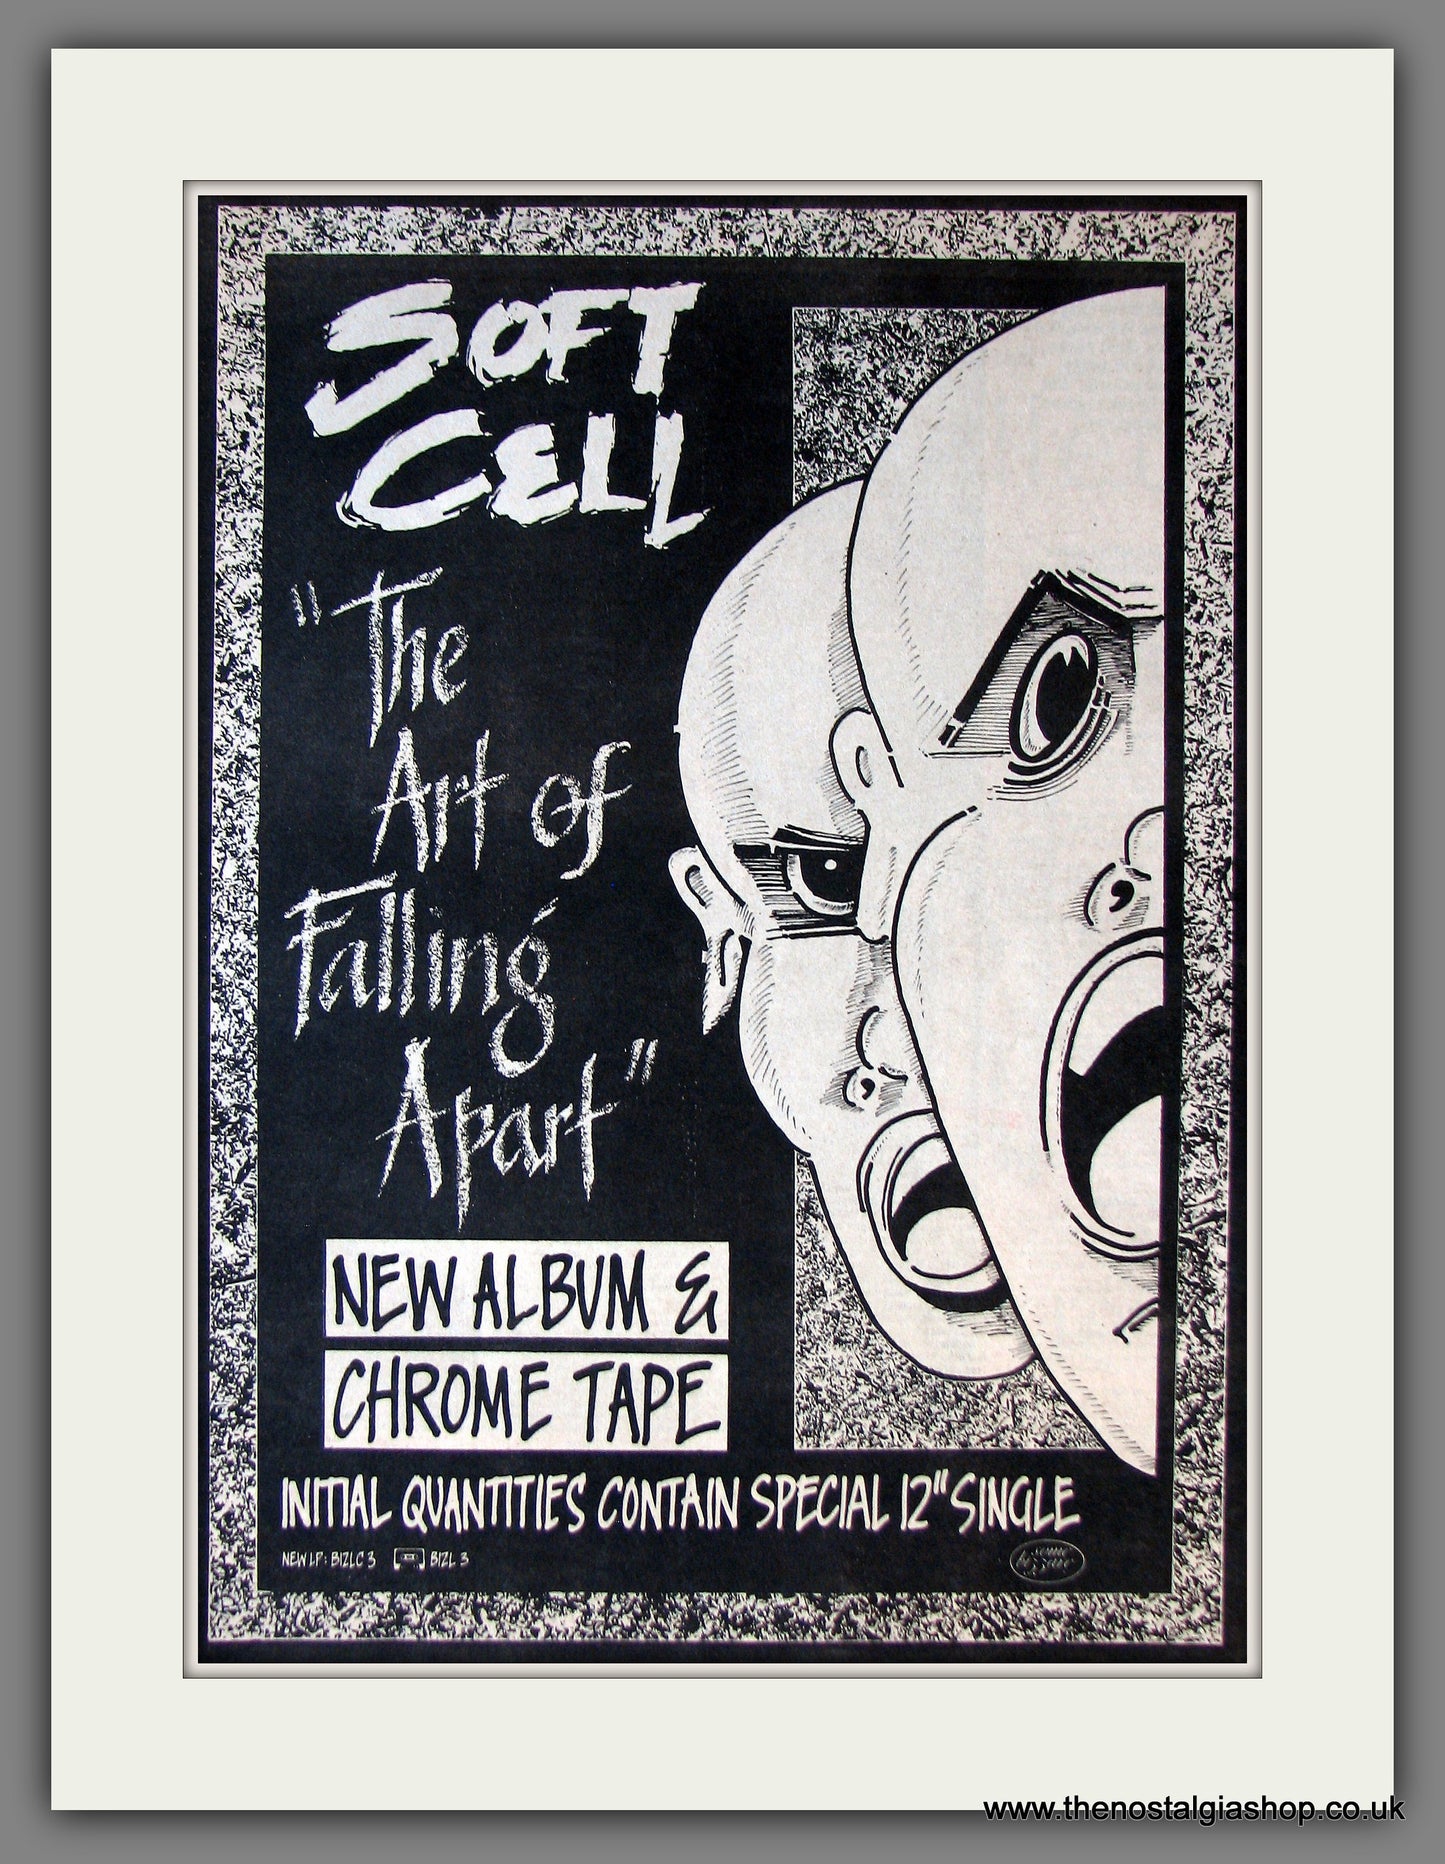 Soft Cell. The Art Of Falling Apart. Original Advert 1983 (ref AD13873)